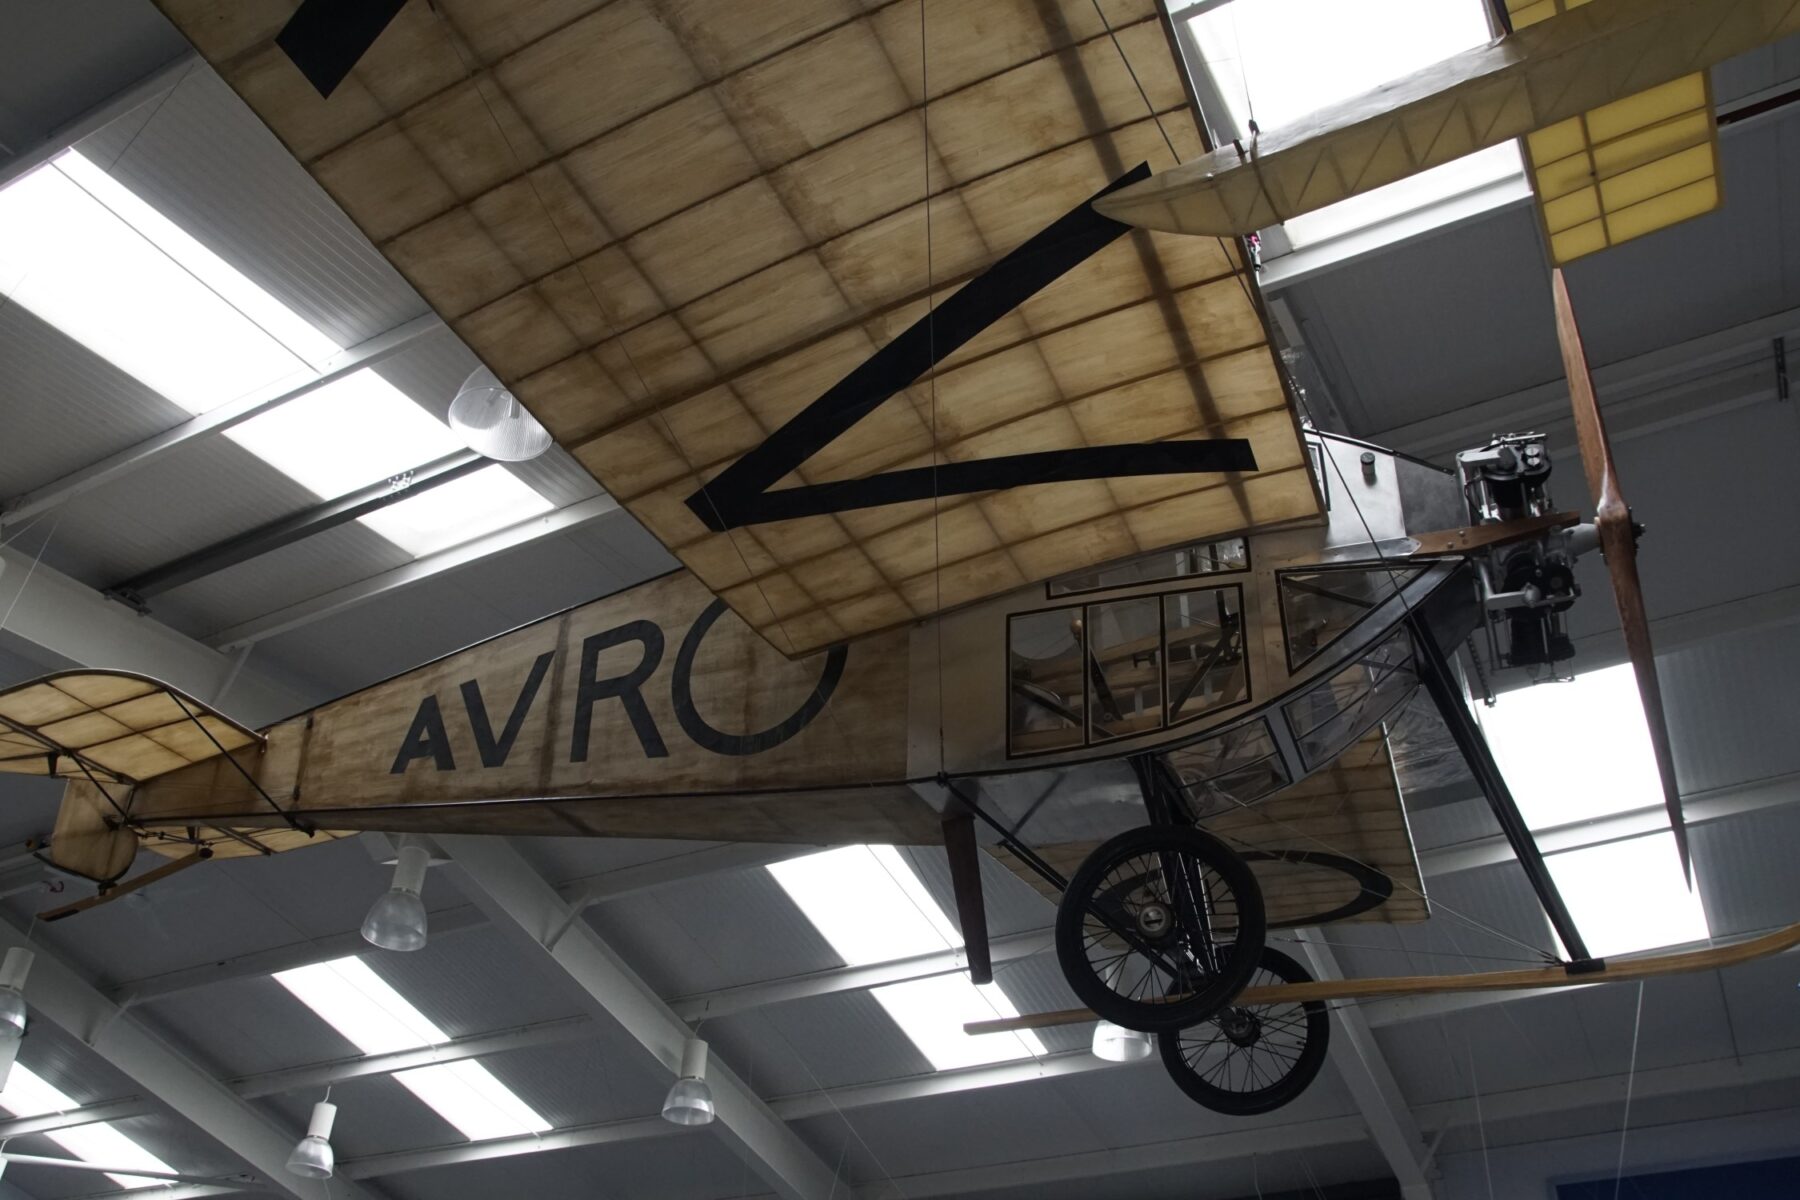 vintage aeroplane suspended from the ceiling of the AVRO museum